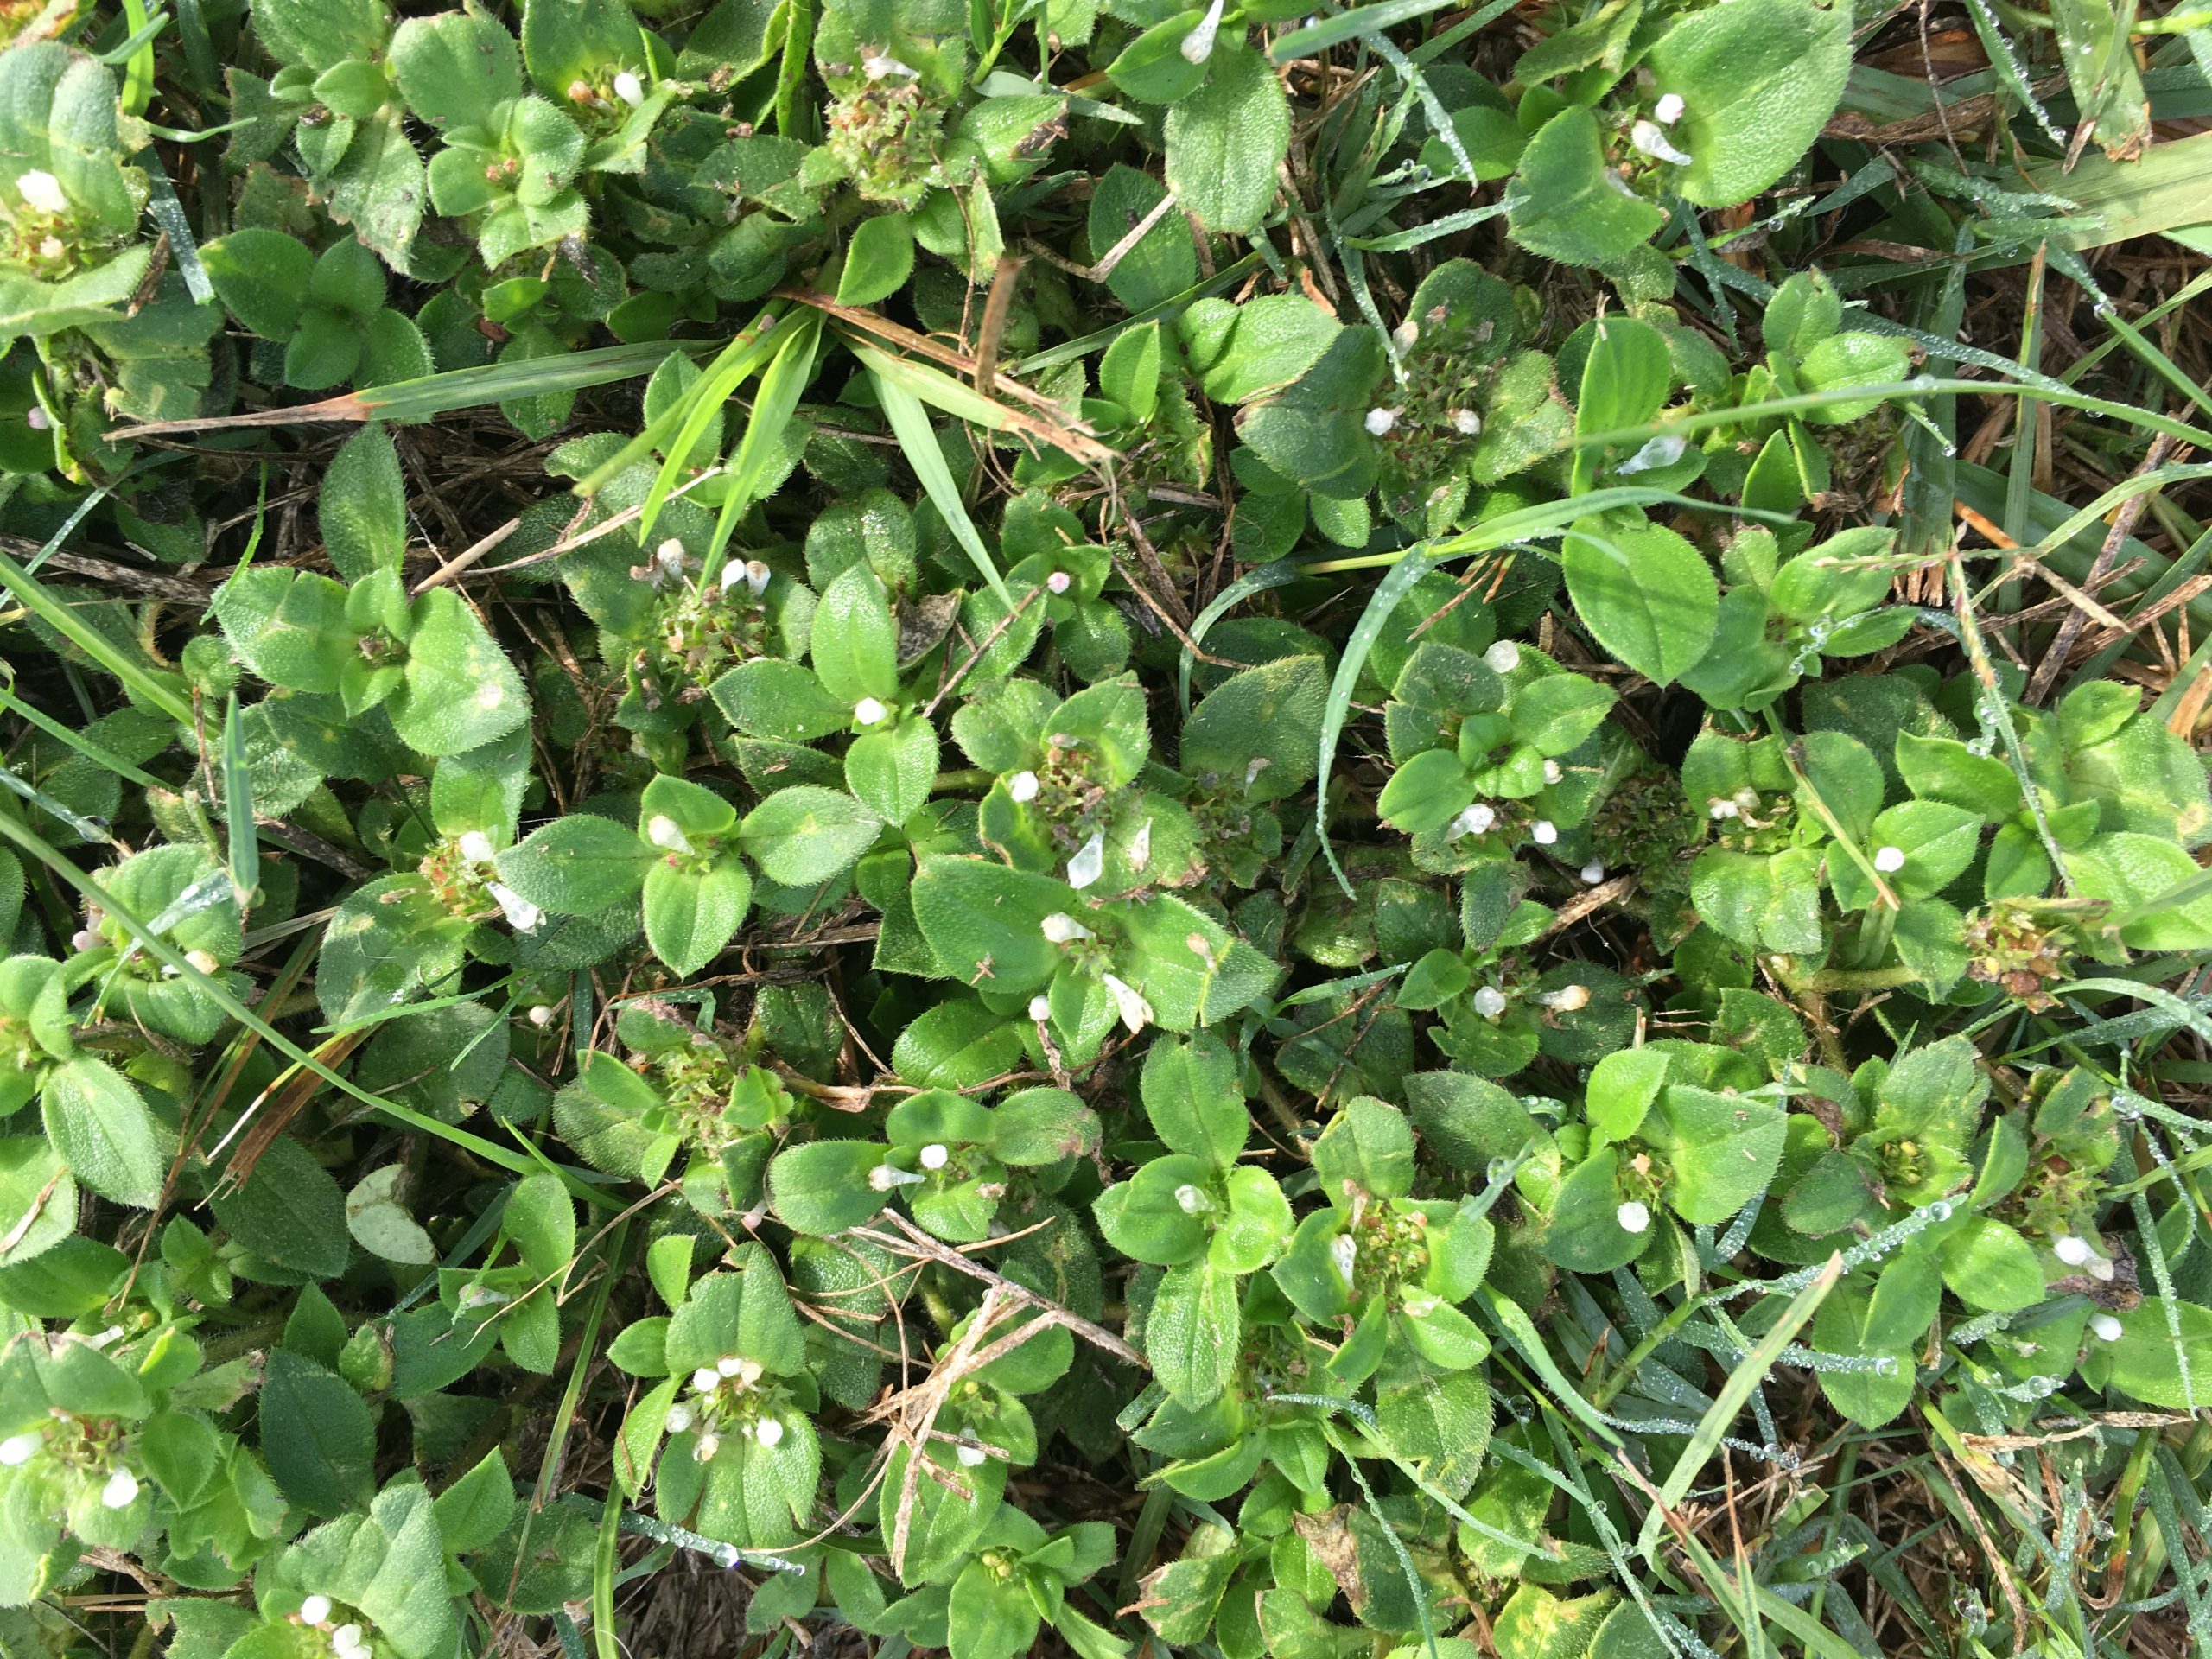 How to Remove Chickweed in Lawn